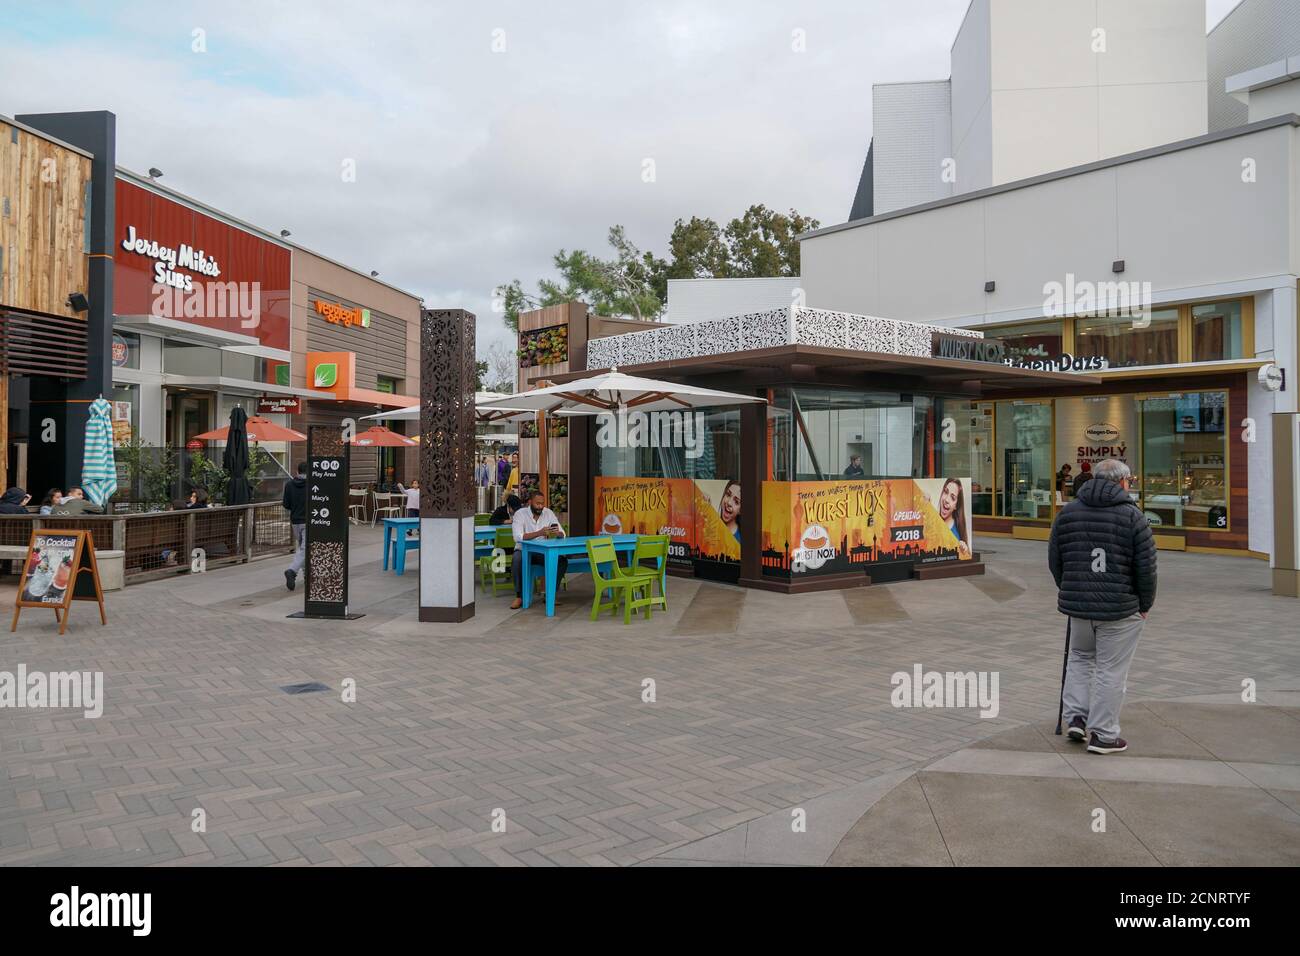 UTC Westfield Shopping Mall at University Town Centre .Outdoor shopping center with upmarket chain retailers, a movie theater, restaurants. .La Jolla, San Diego, California, USA. March 23rd, 2019 Stock Photo